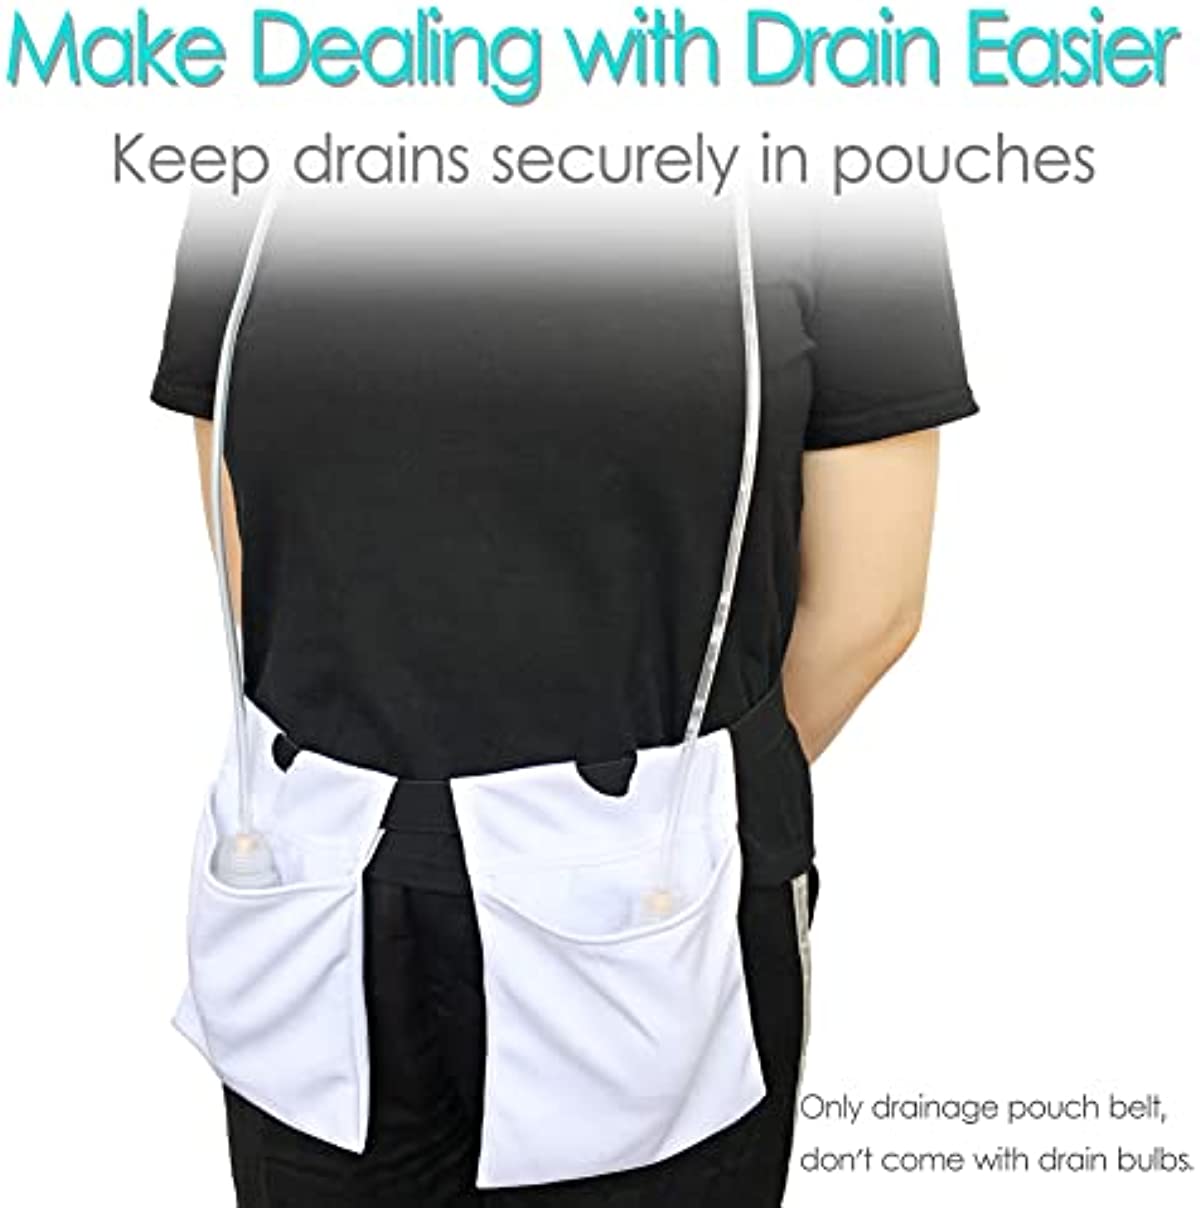 Breathable Drain Holder After Tummy Tuck Mastectomy Drainage Quick Dry Pouch Belt Supplies Pockets Mesh Bag for JP drains Bulb Breast Post Surgery Shower Recovery White